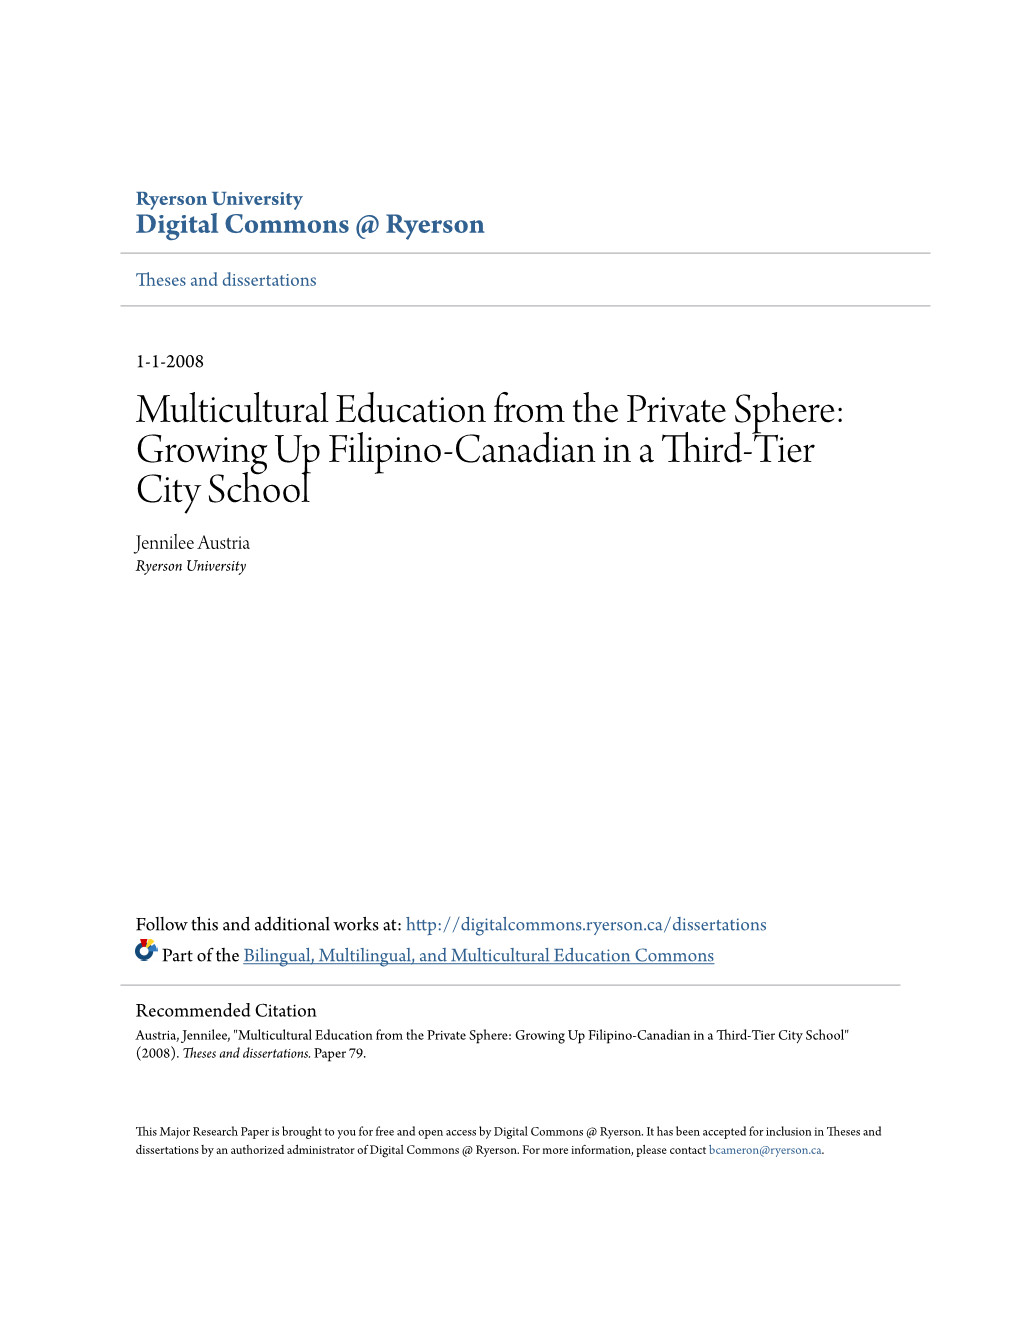 Multicultural Education from the Private Sphere: Growing up Filipino-Canadian in a Third-Tier City School Jennilee Austria Ryerson University